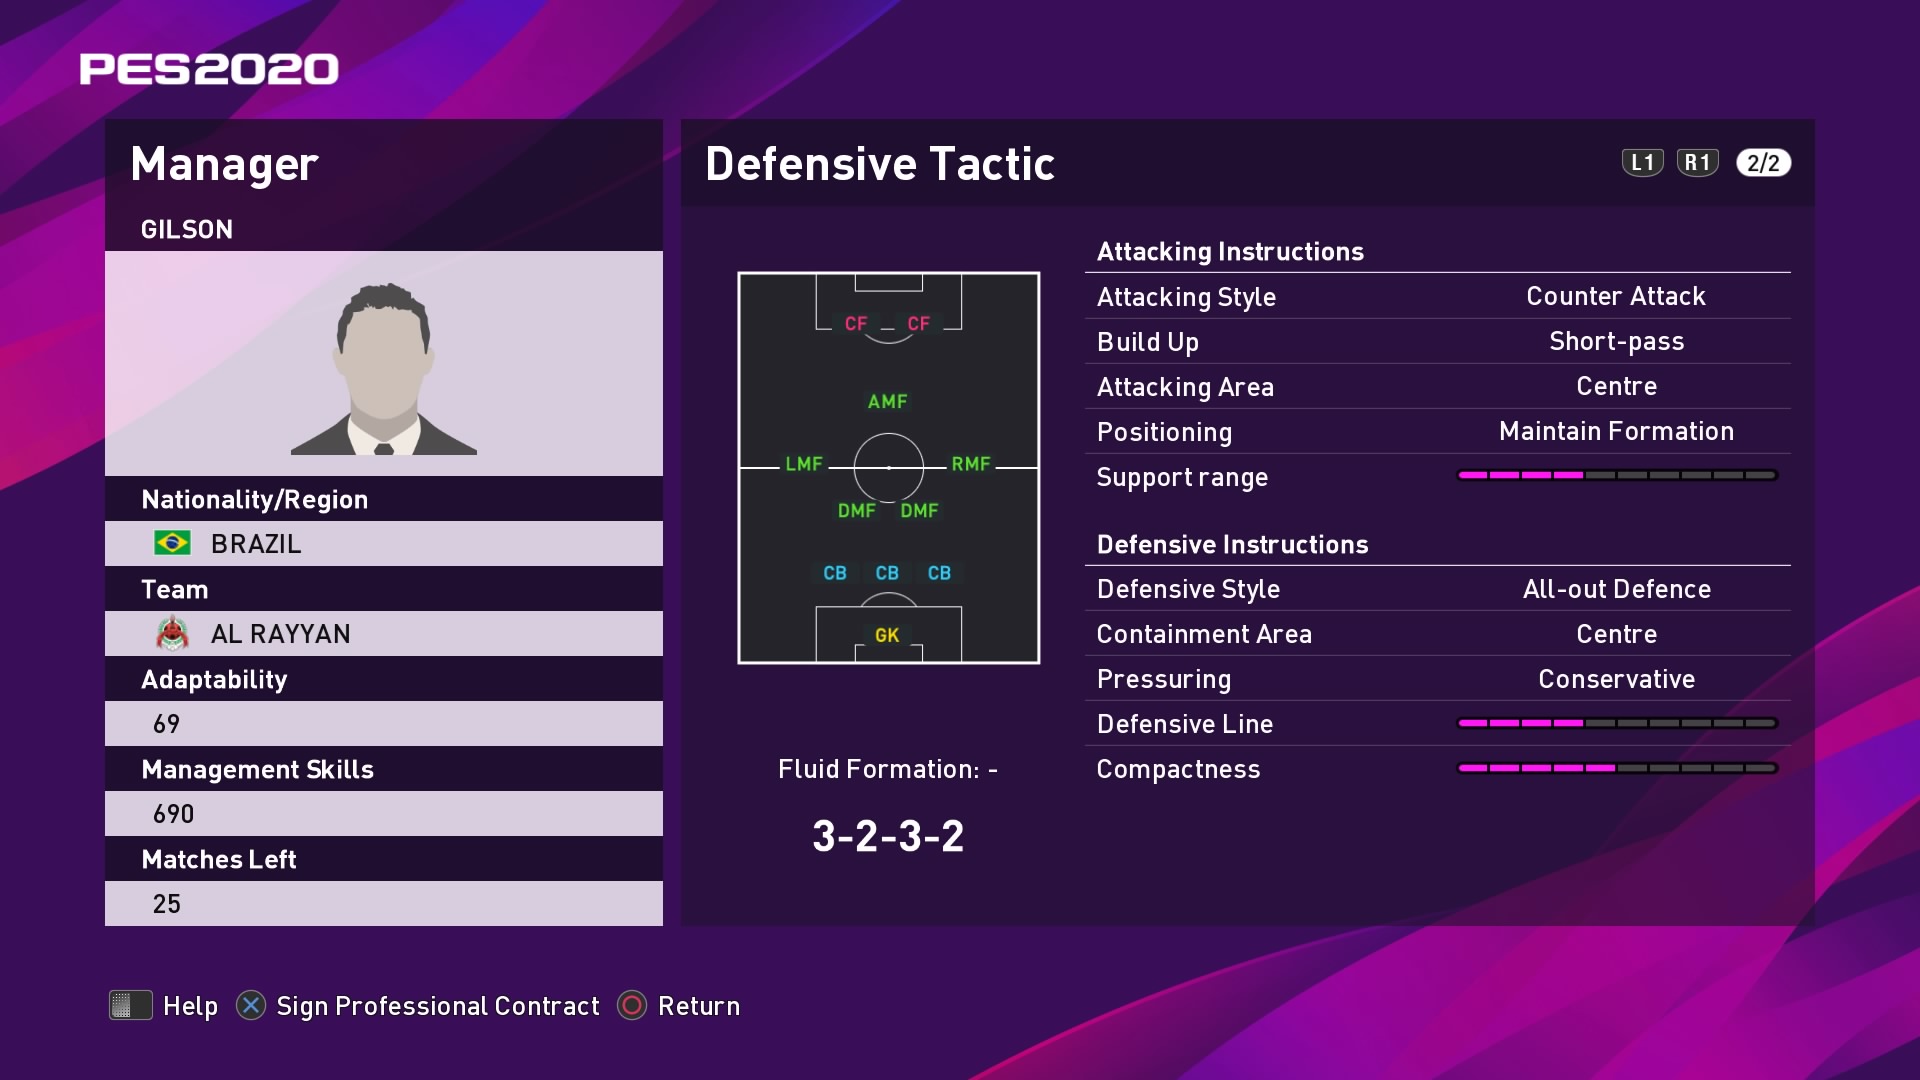 Gilson Defensive Tactic in PES 2020 myClub